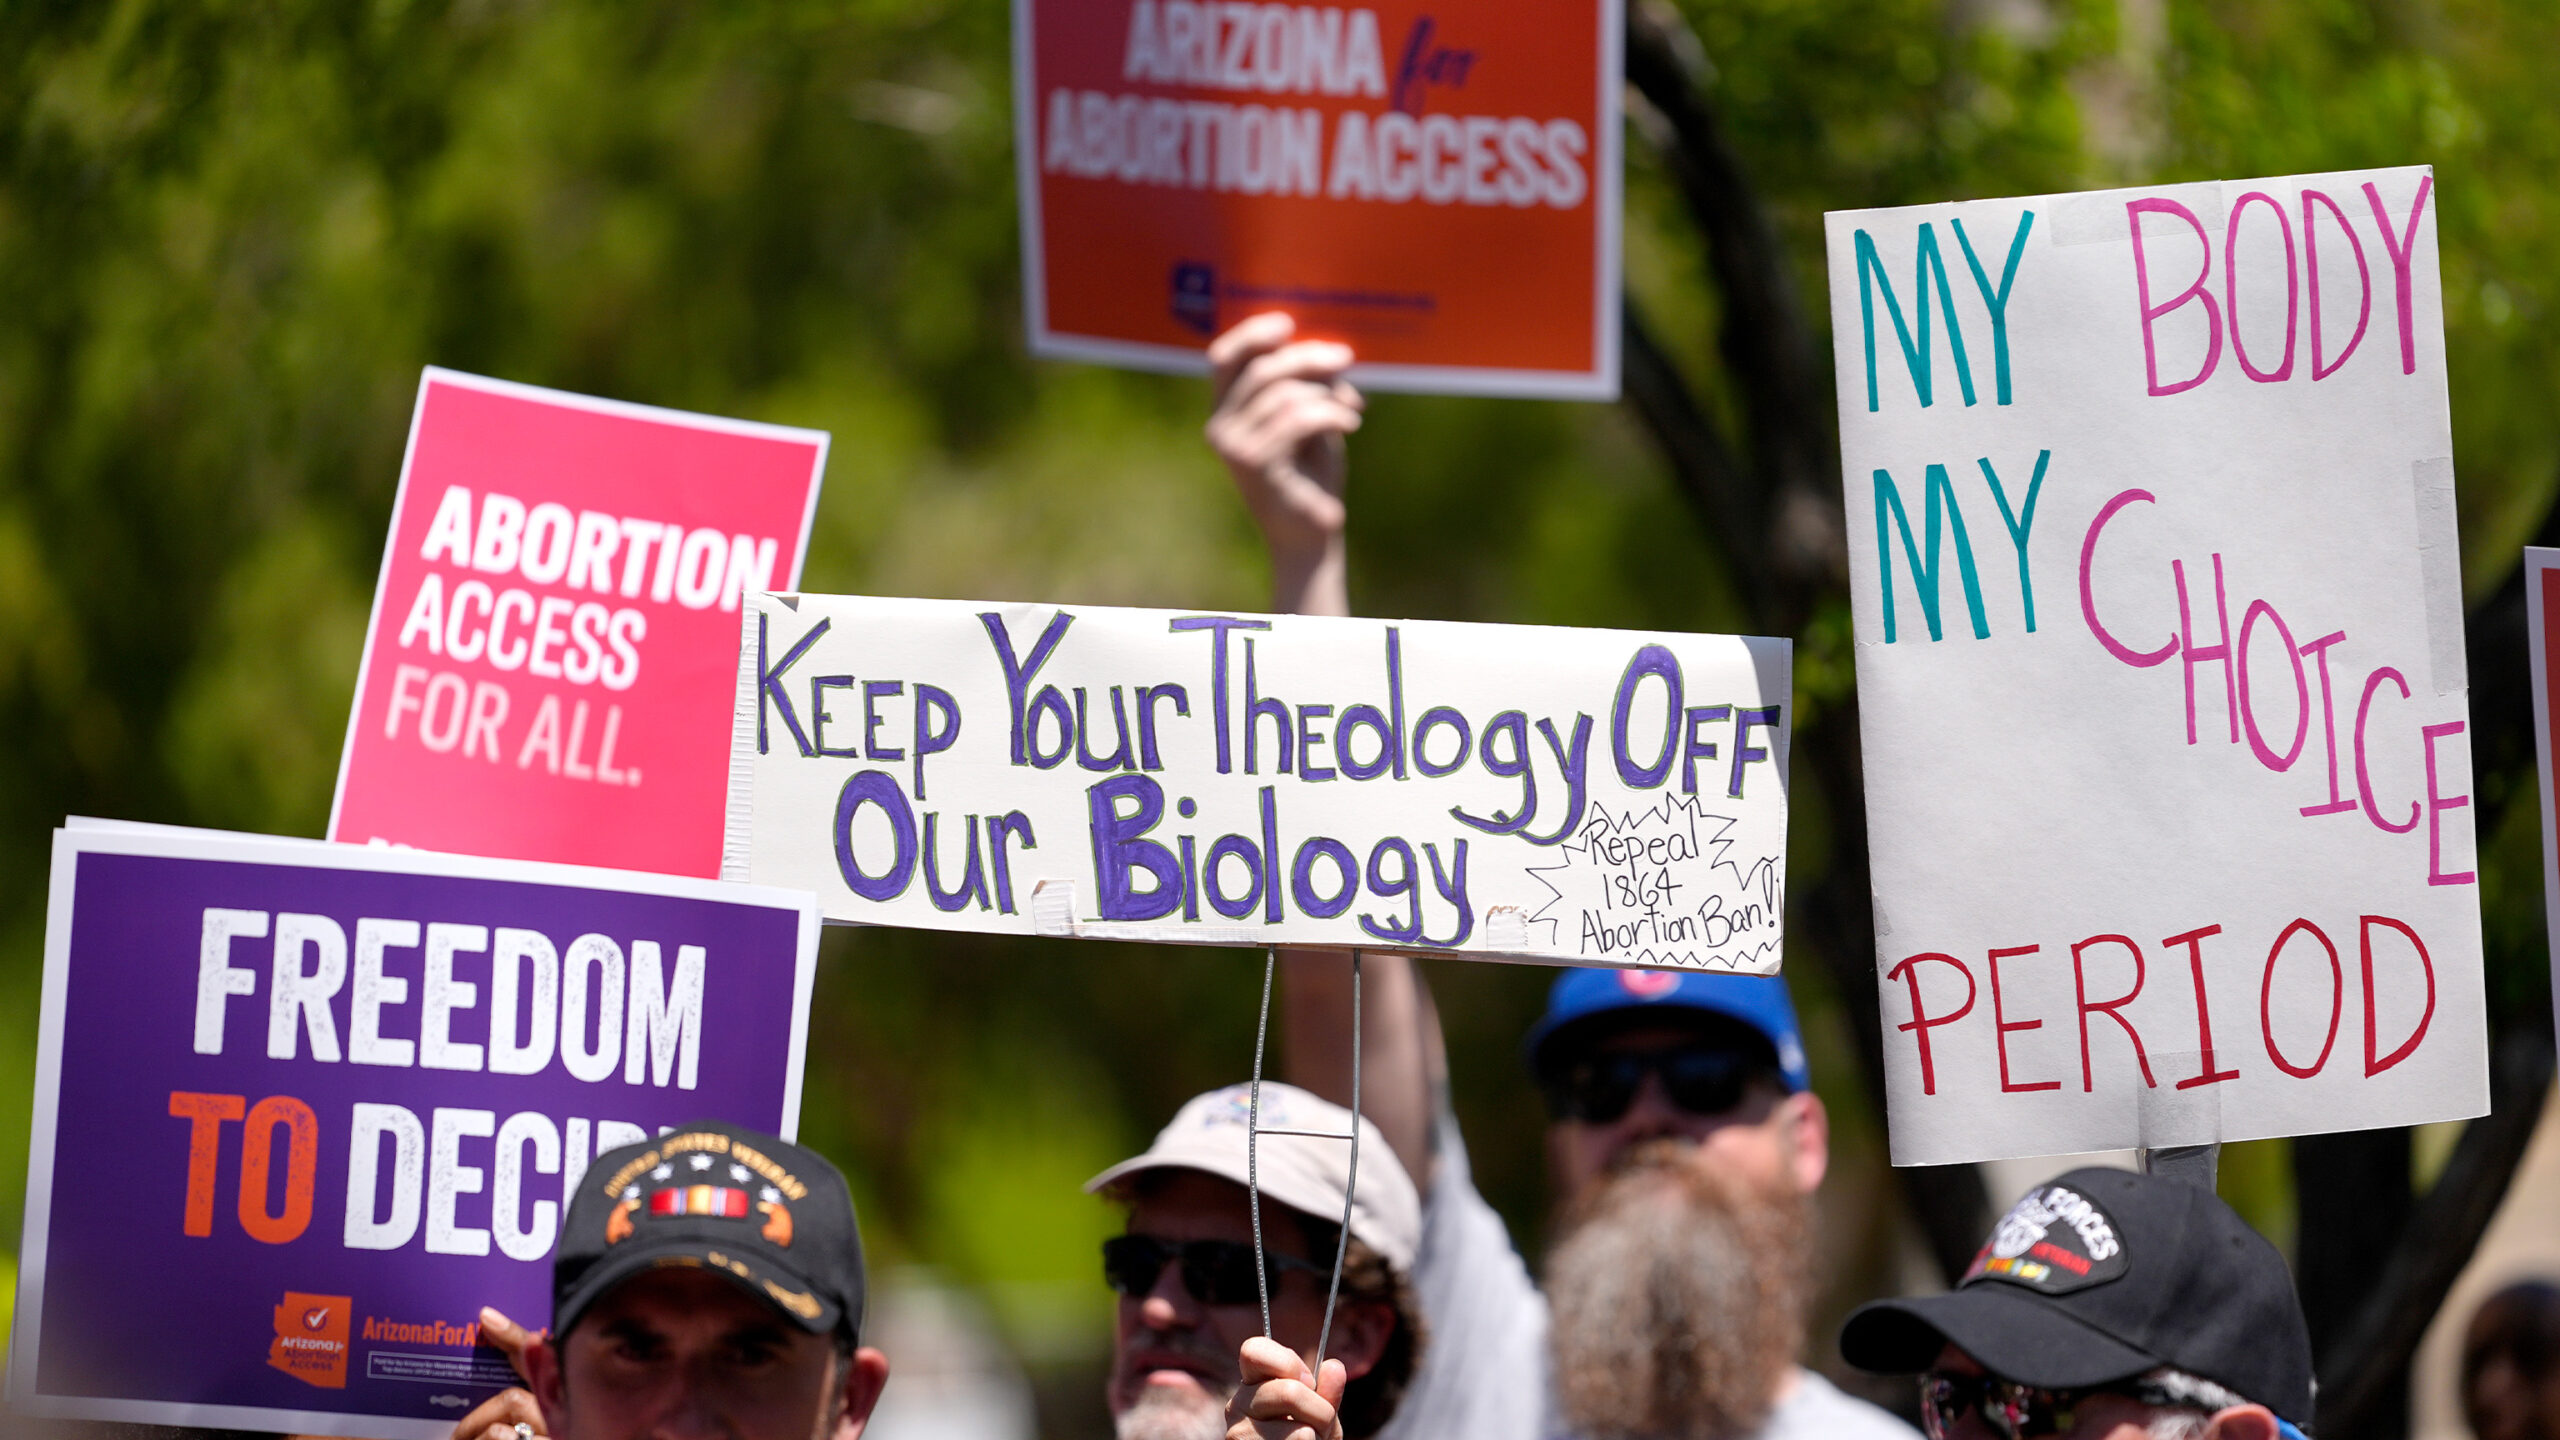 Arizona House repeals controversial 1864 abortion ban in a vote.